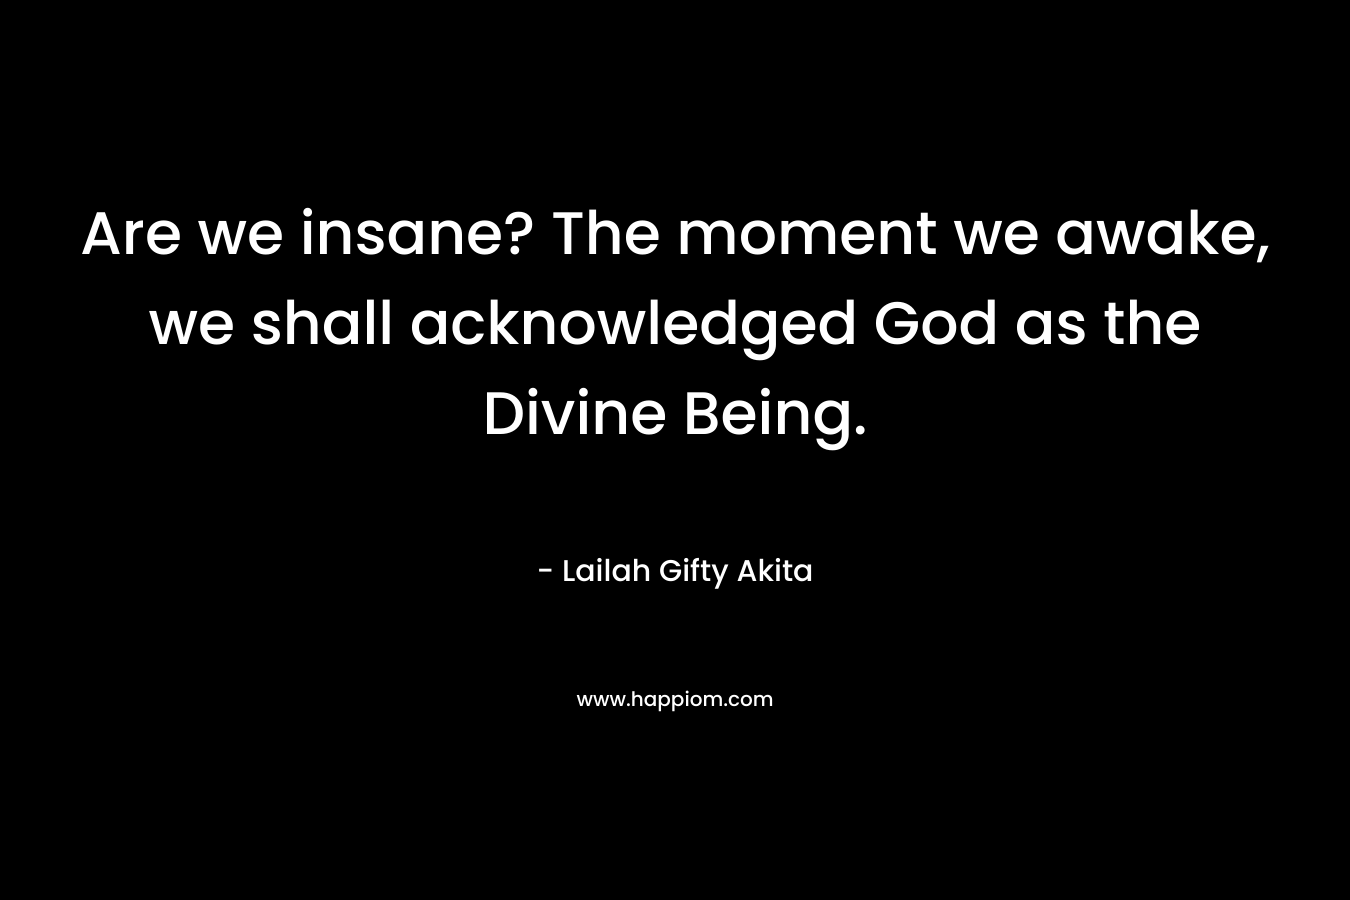 Are we insane? The moment we awake, we shall acknowledged God as the Divine Being.